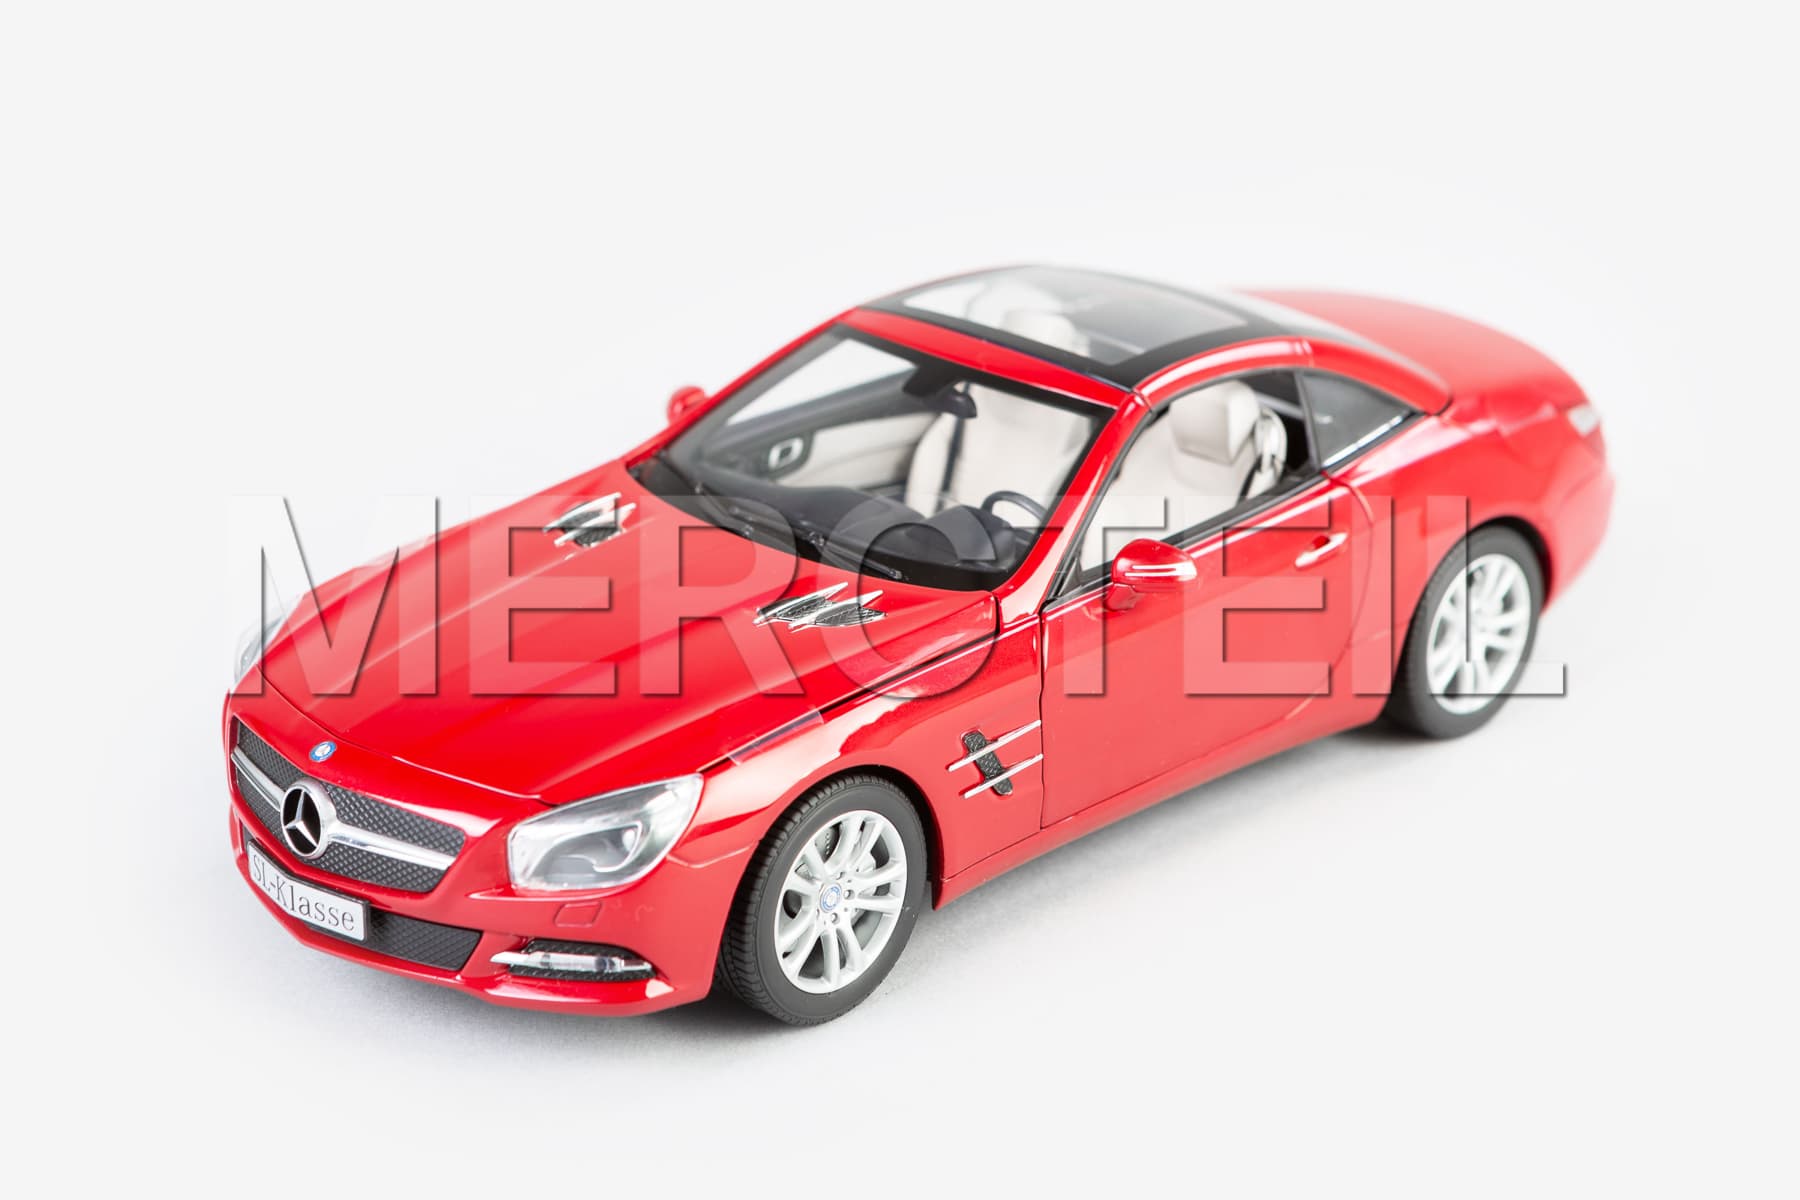 SL Class 1:18 Model Car R231 Genuine Mercedes Benz Classic Collection (part number: B66960108)